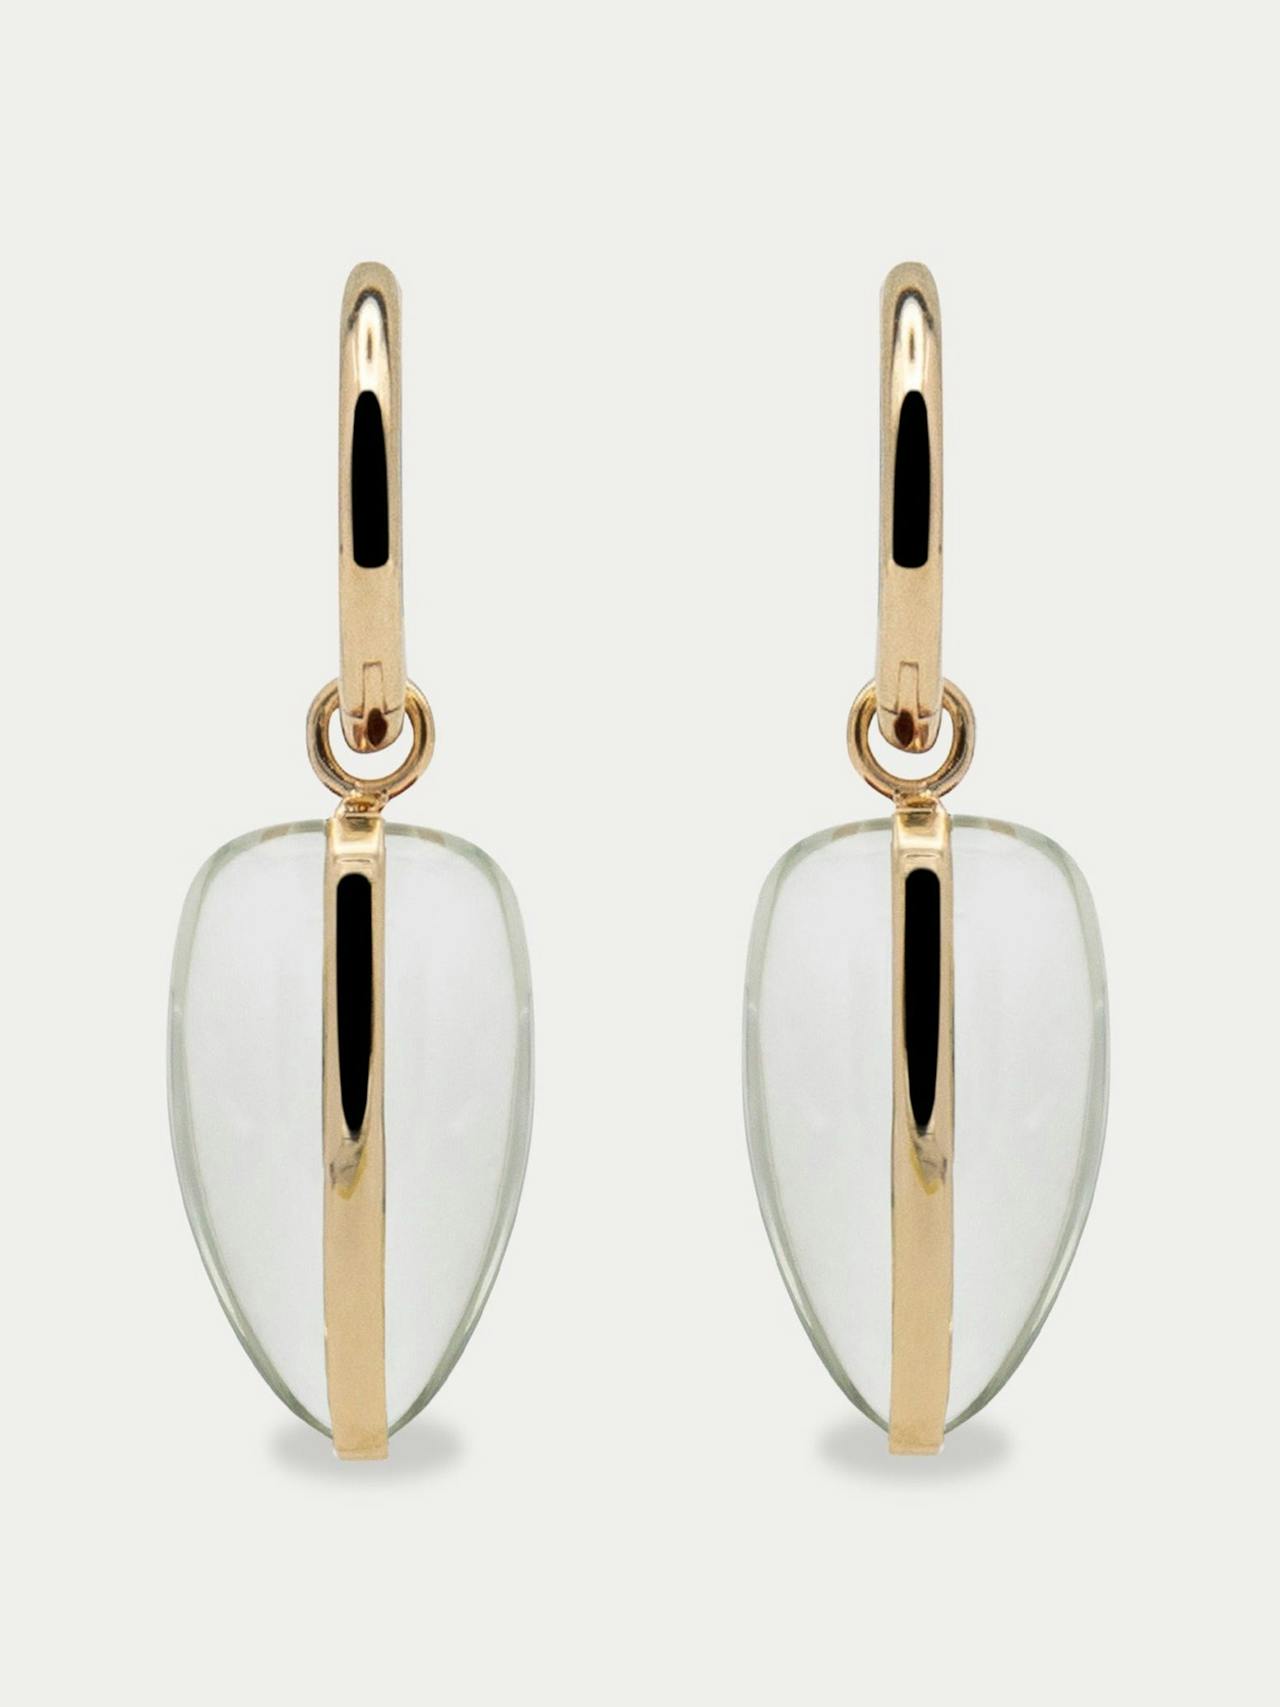 14kt recycled gold and green amethyst Pebble earrings